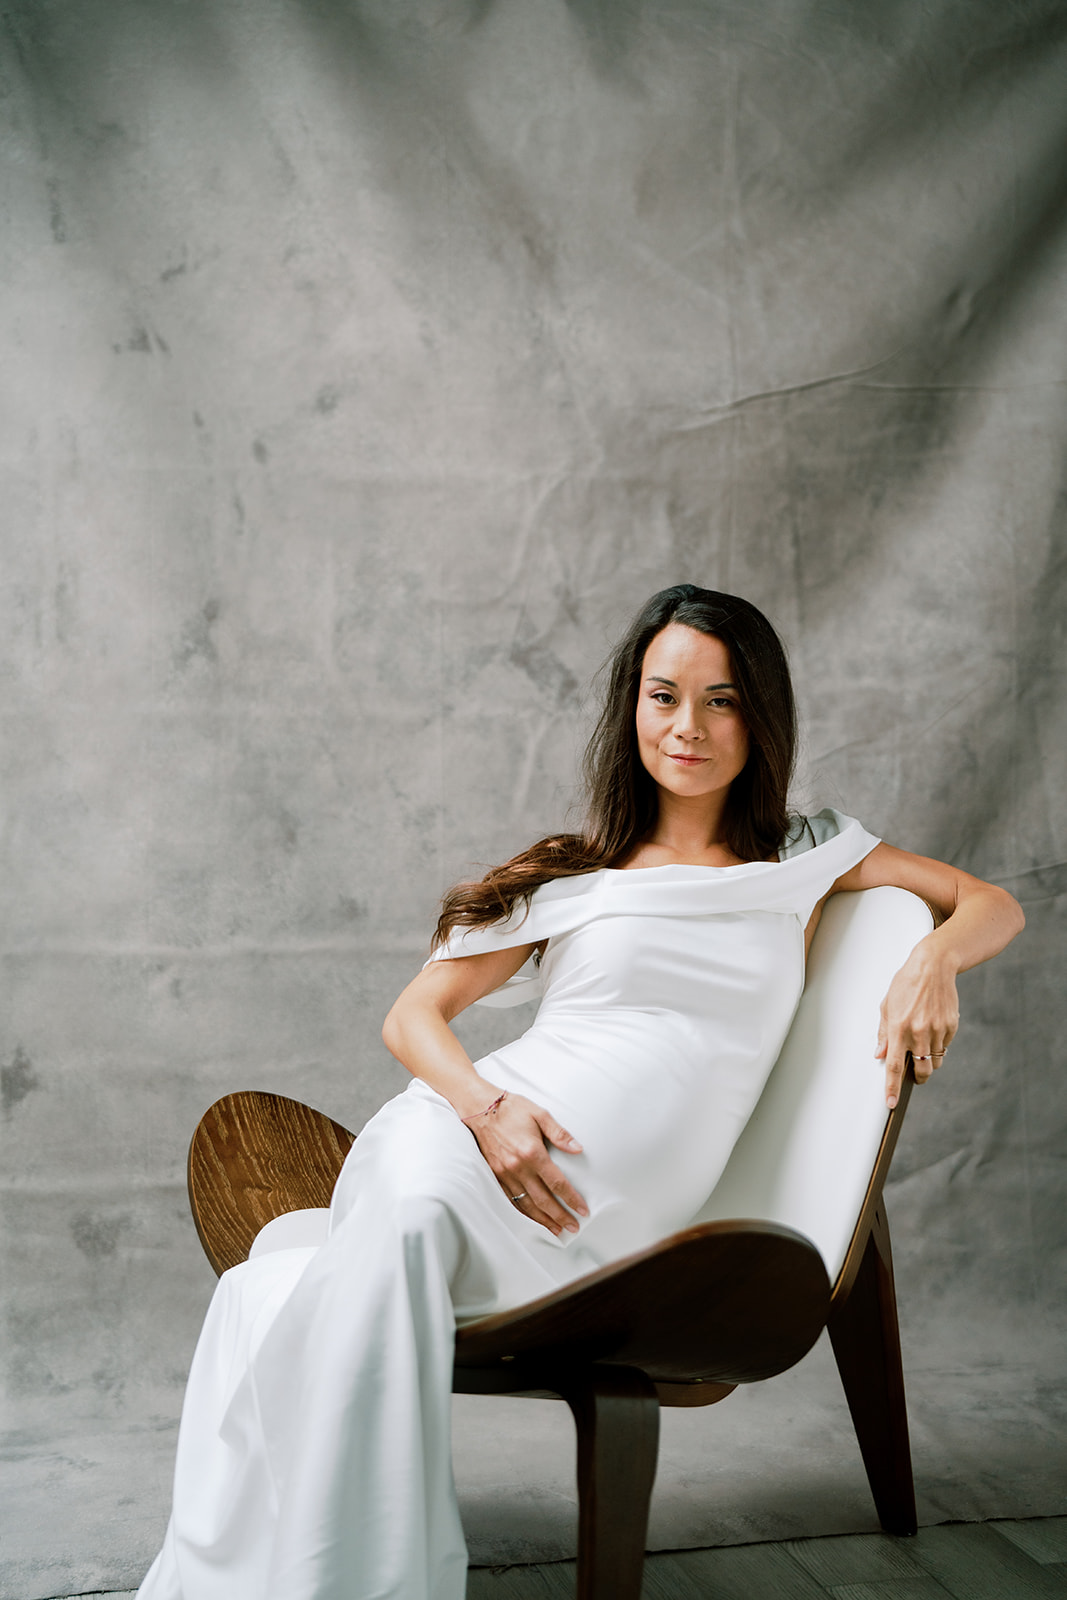 A pregnant woman in a white dress sitting in a chair looking straight to the camera.